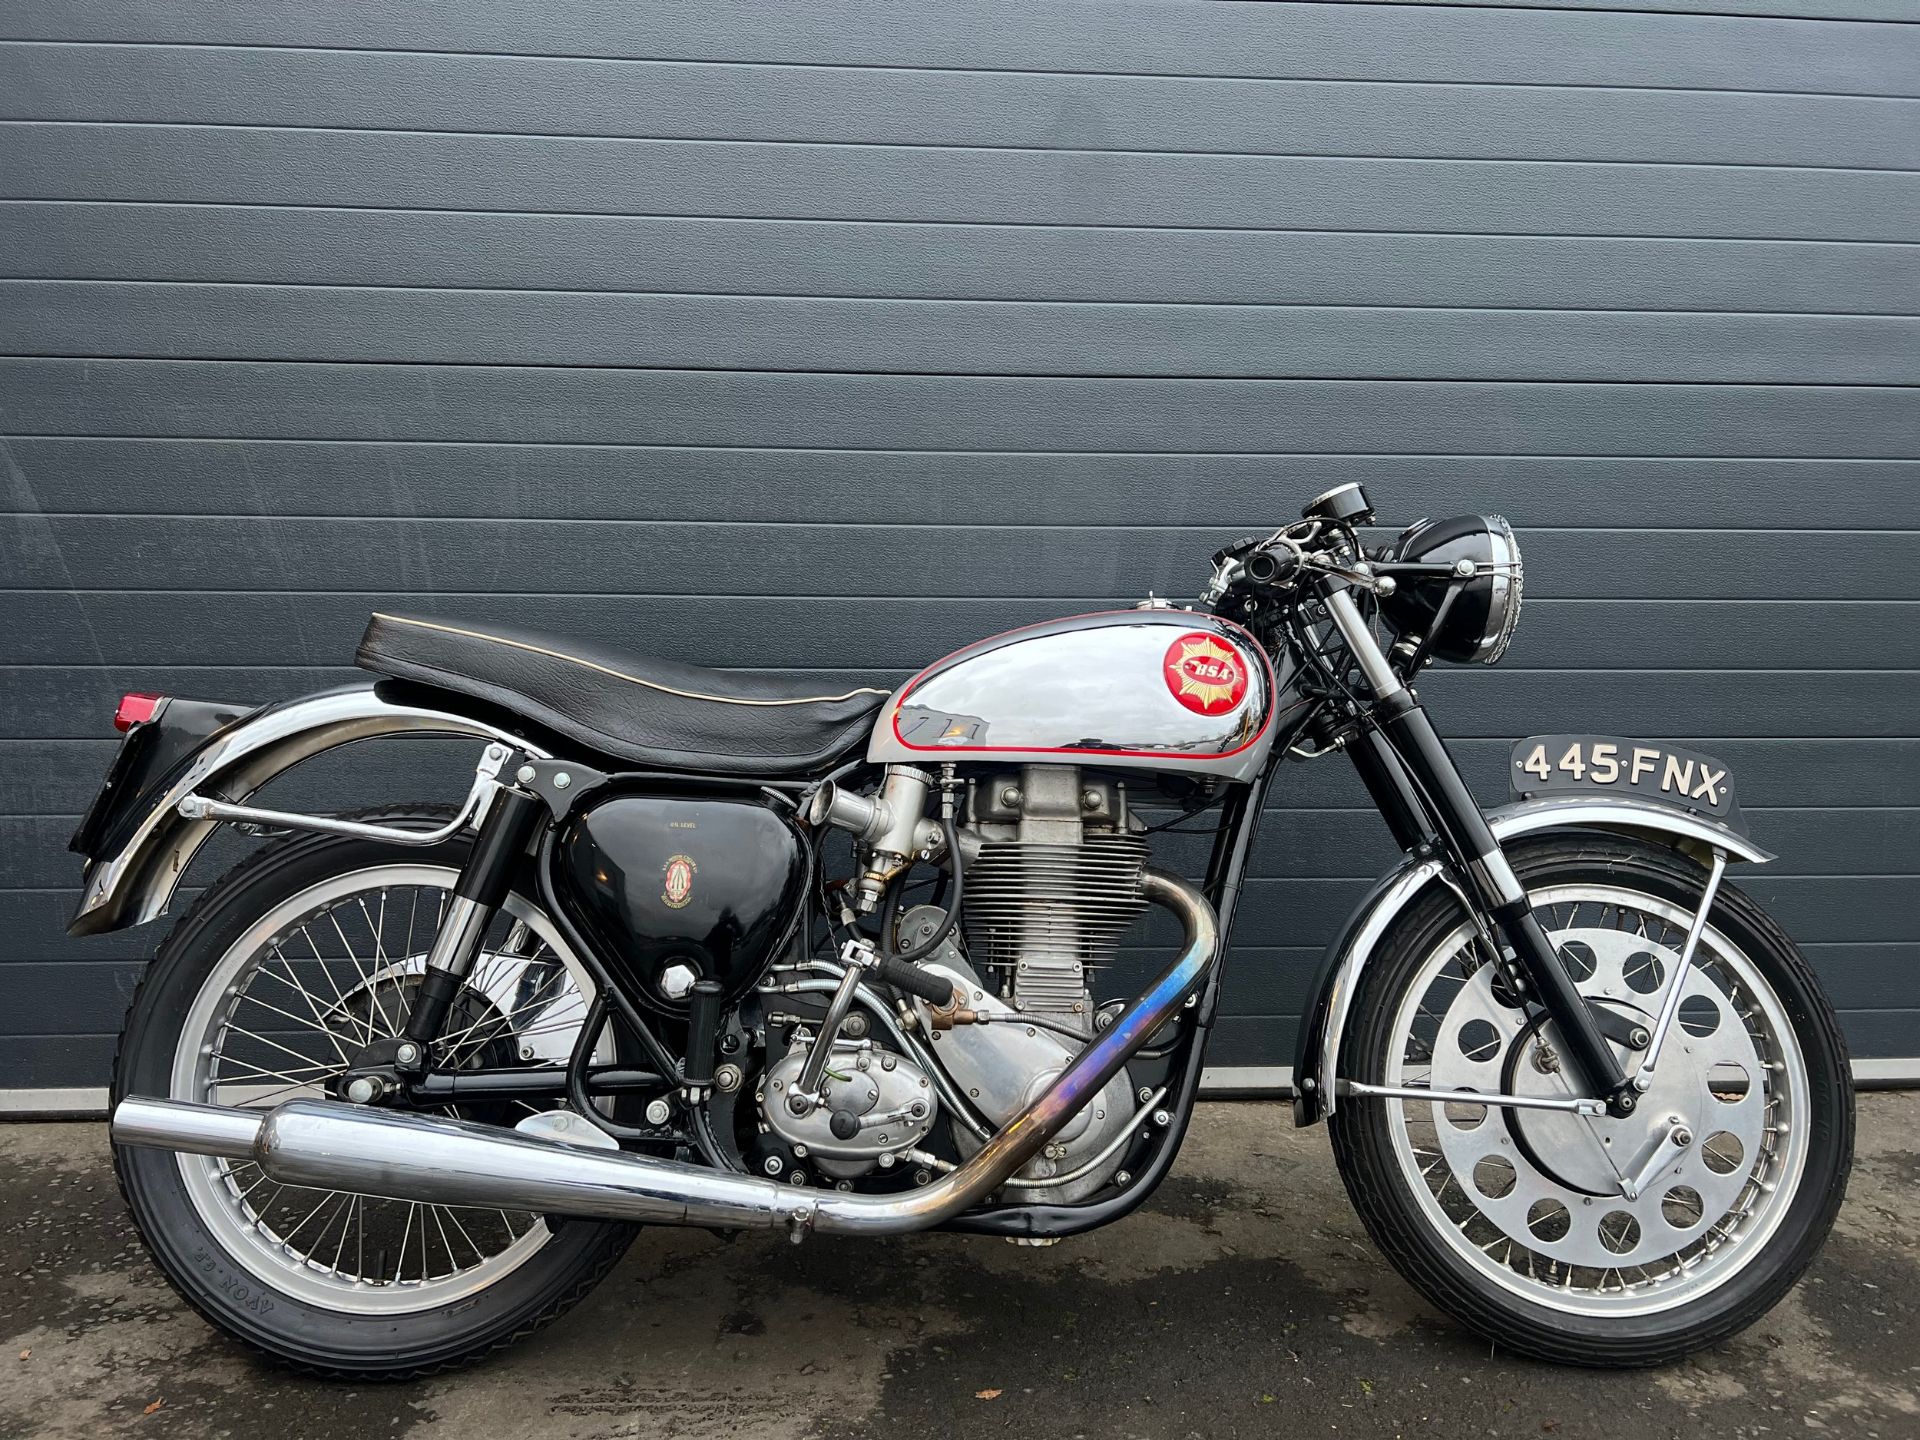 BSA Goldstar DBD34 Motorcycle. Believed to be 1961. 500cc. Frame no. CB32-11092 Engine no.